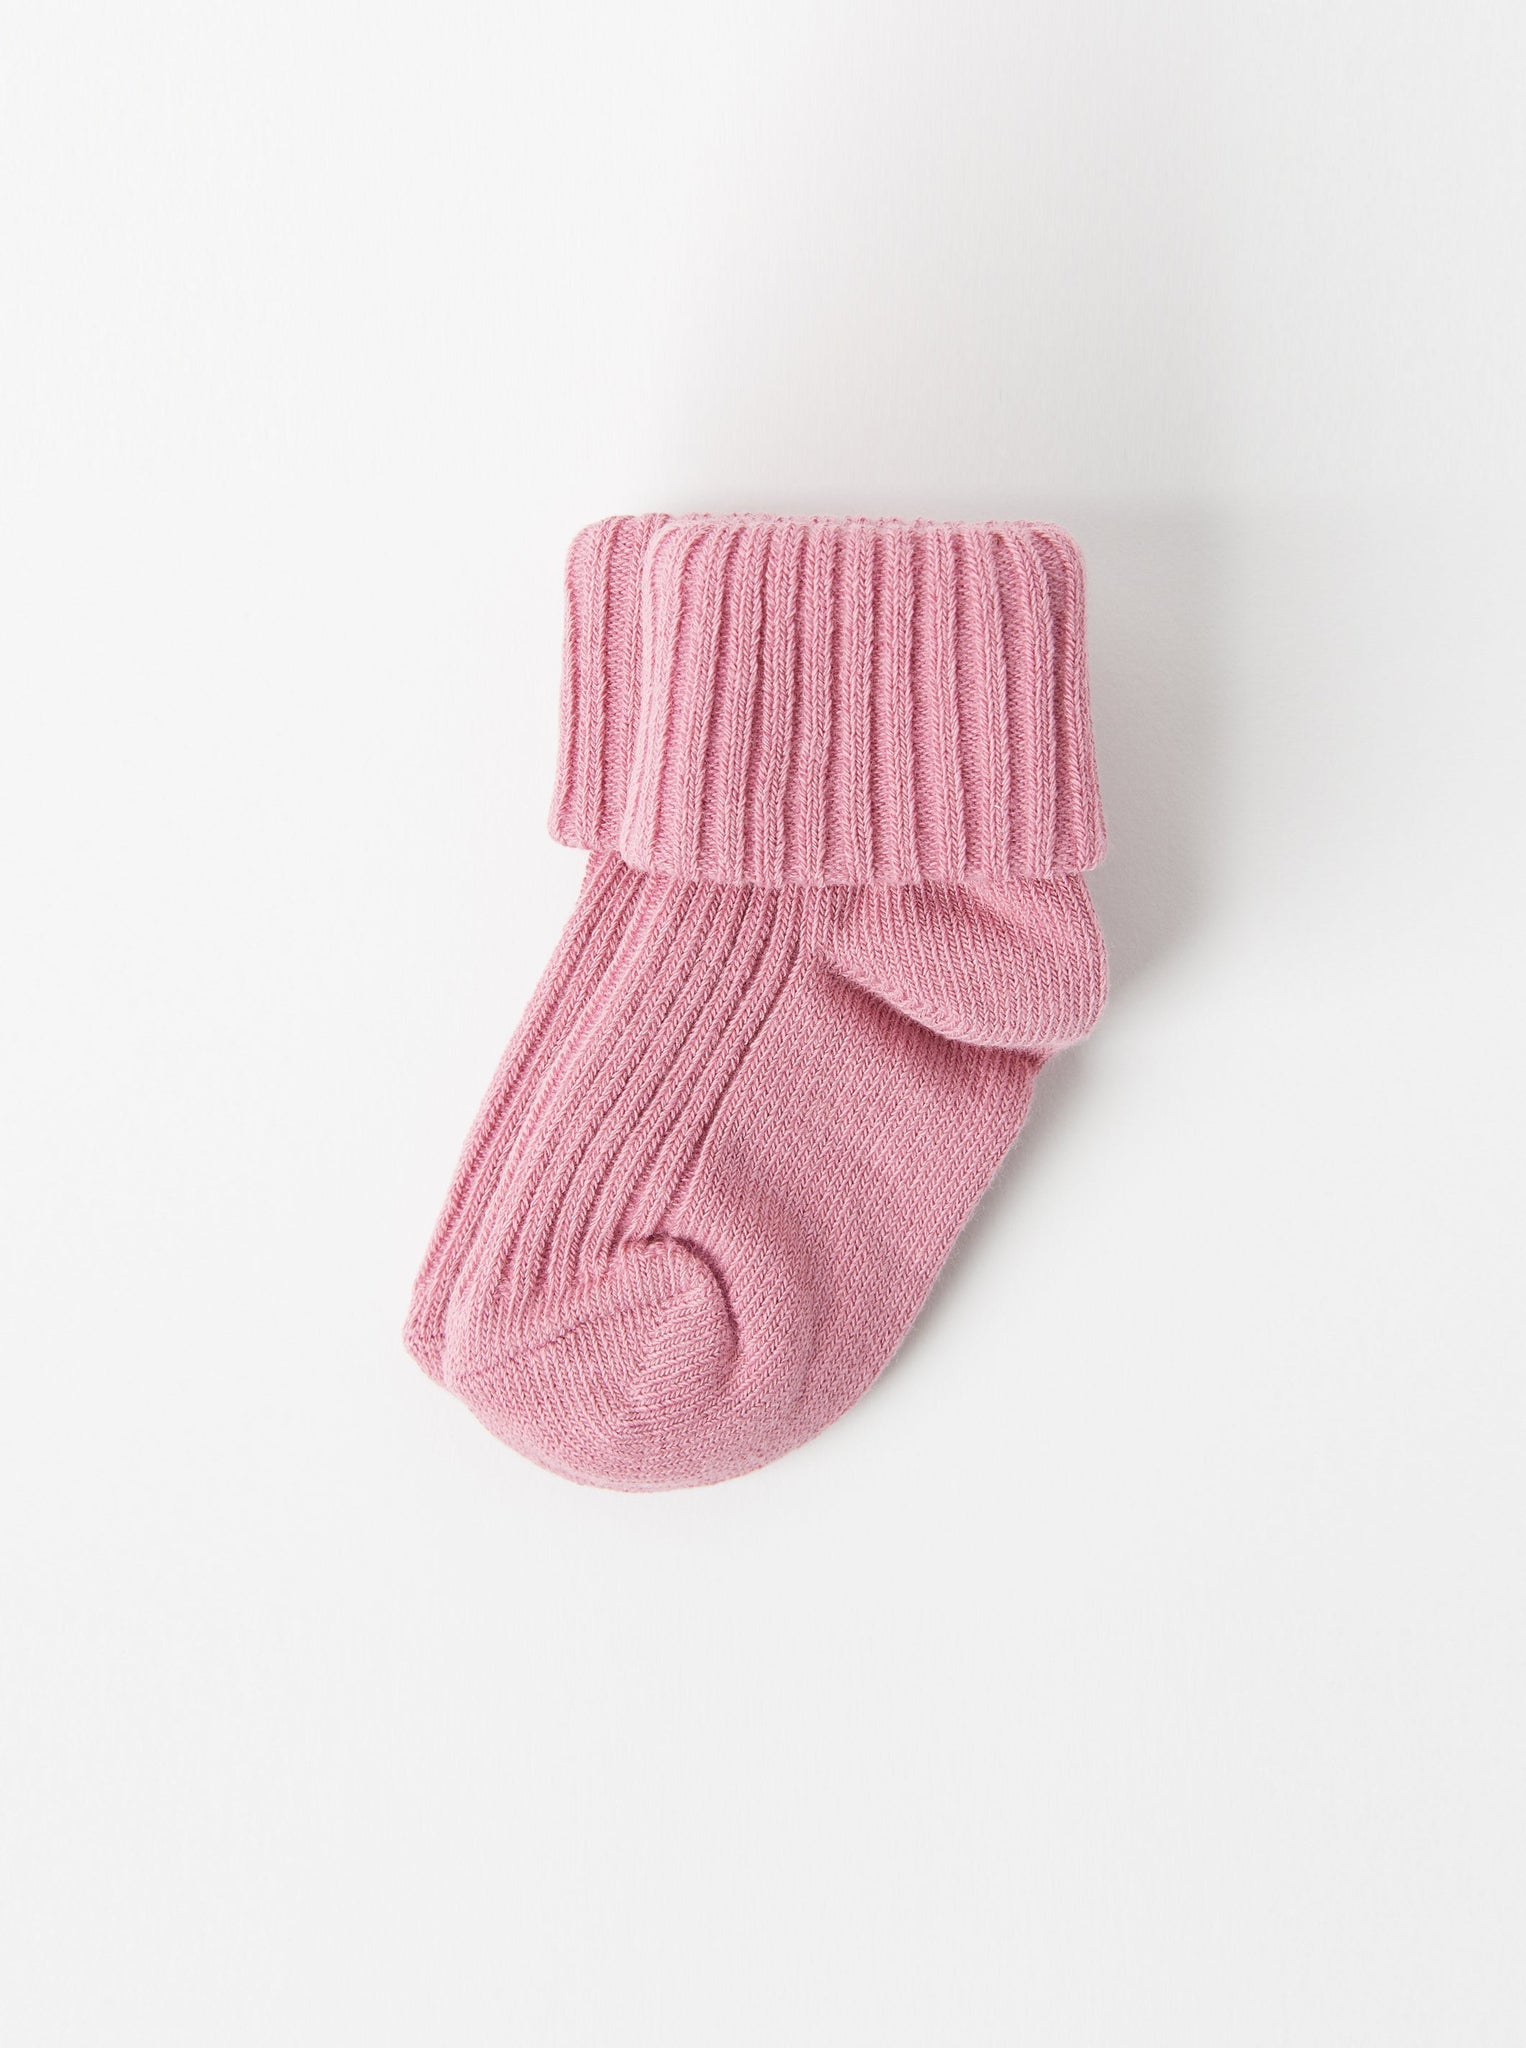 Organic Cotton Pink Baby Socks from the Polarn O. Pyret Kidswear collection. The best ethical kids clothes